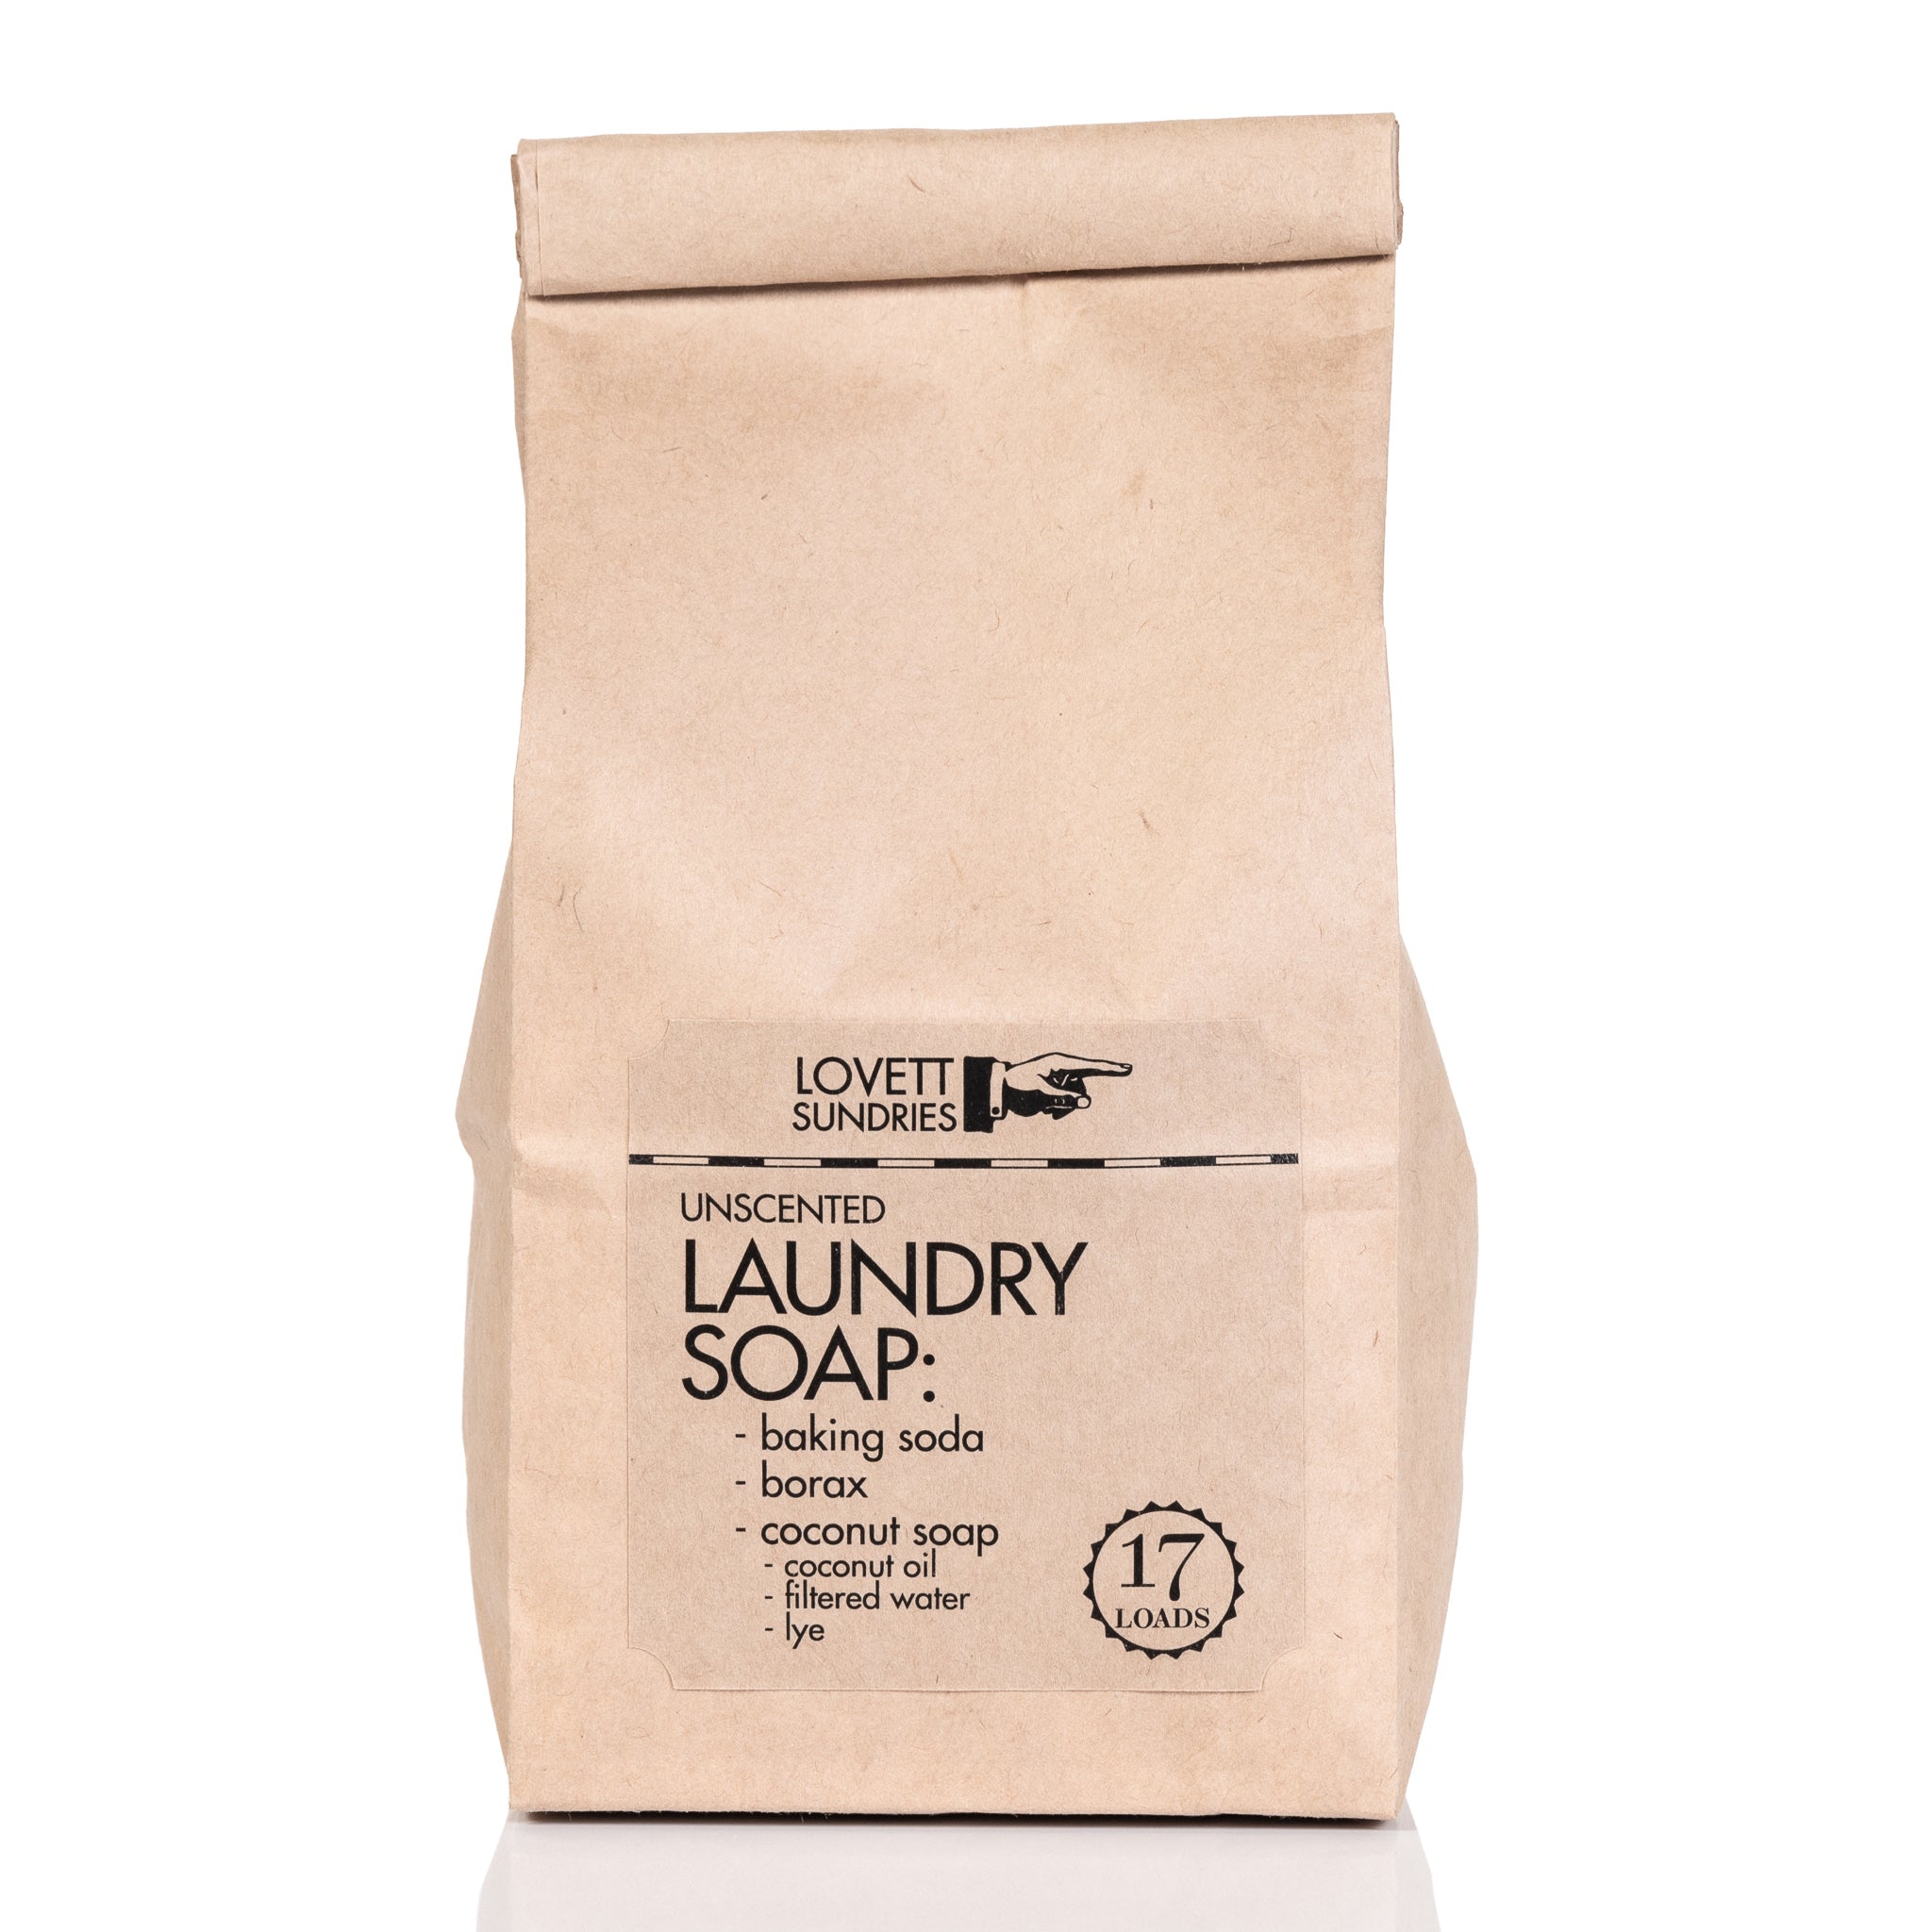 Natural laundry soap in brown bag on white background.